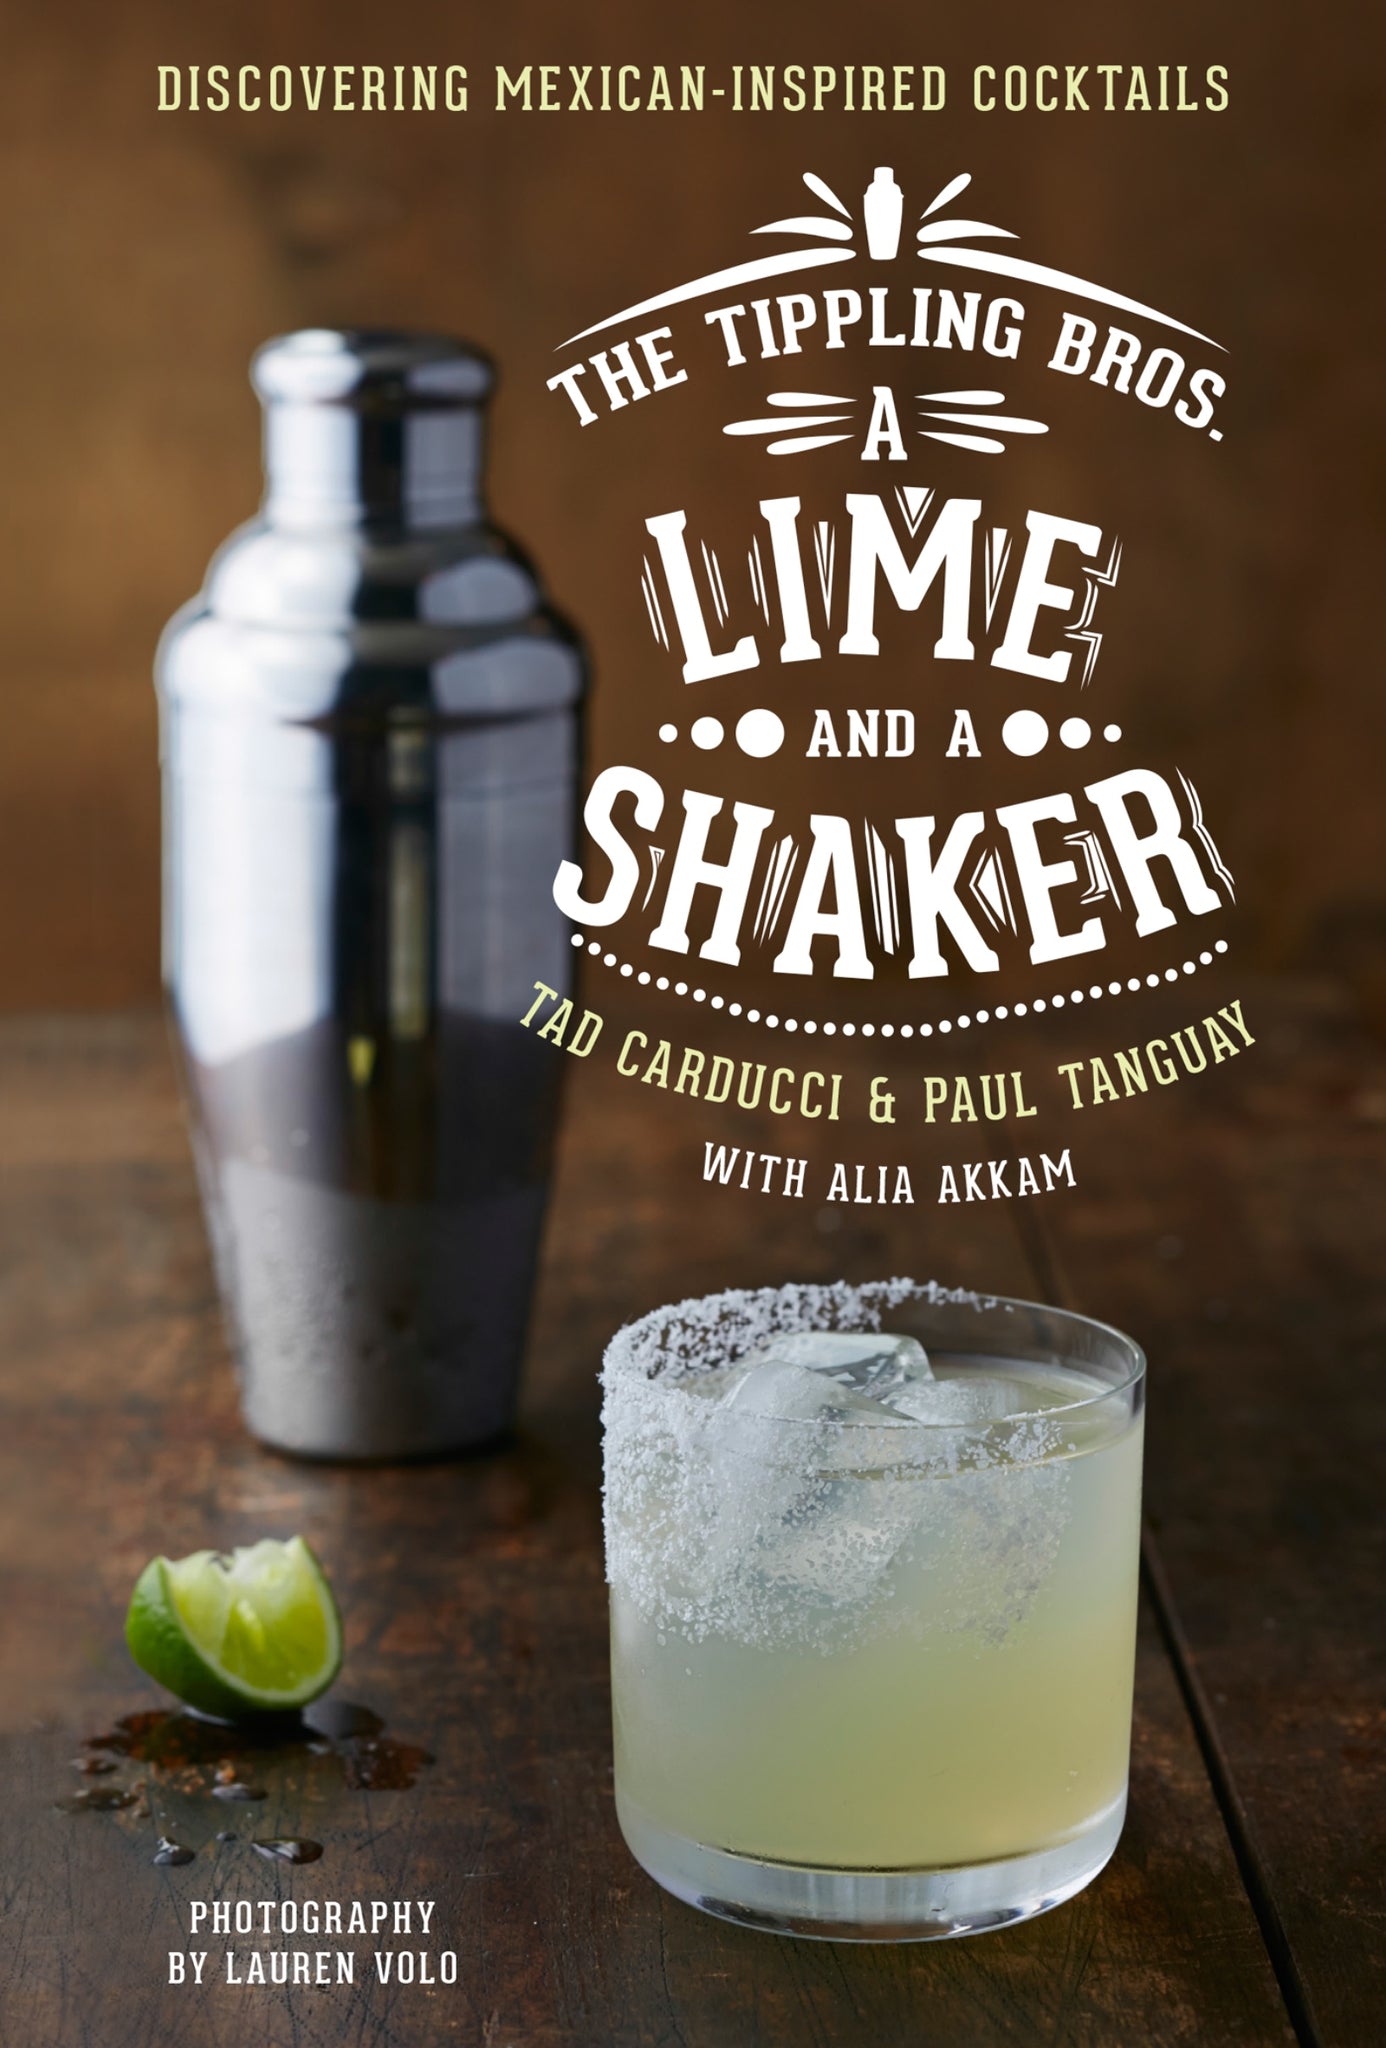 The Tippling Bros. A Lime And A Shaker : Discovering Mexican-Inspired Cocktails